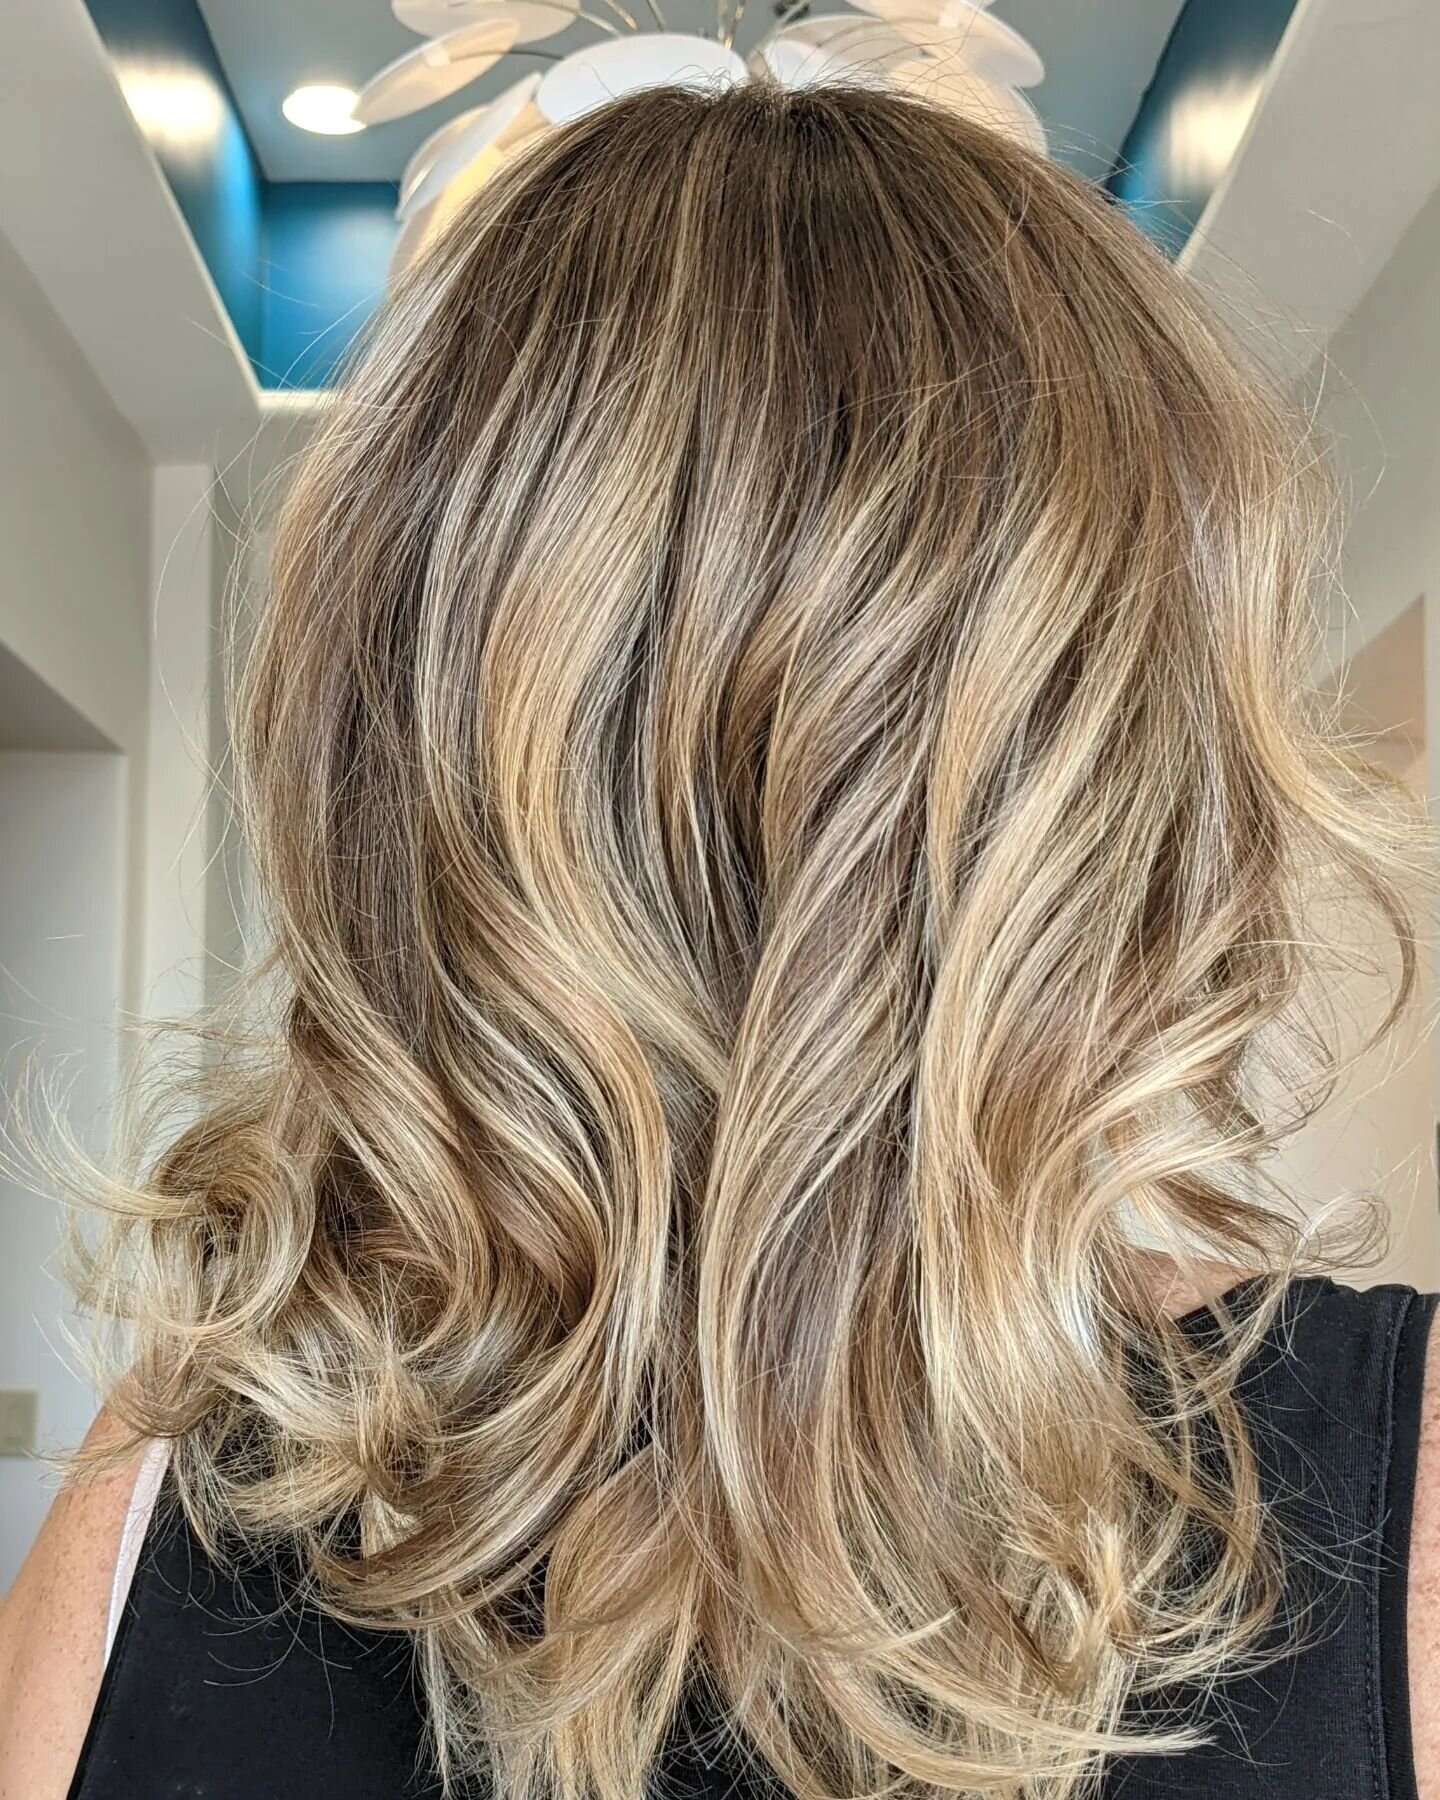 That beautiful blonde dimension really 🍾pOpS!🍾 When you leave some natural/dark! Over blonding/foiling is not the best way to be blonde! Less is really more 🤍